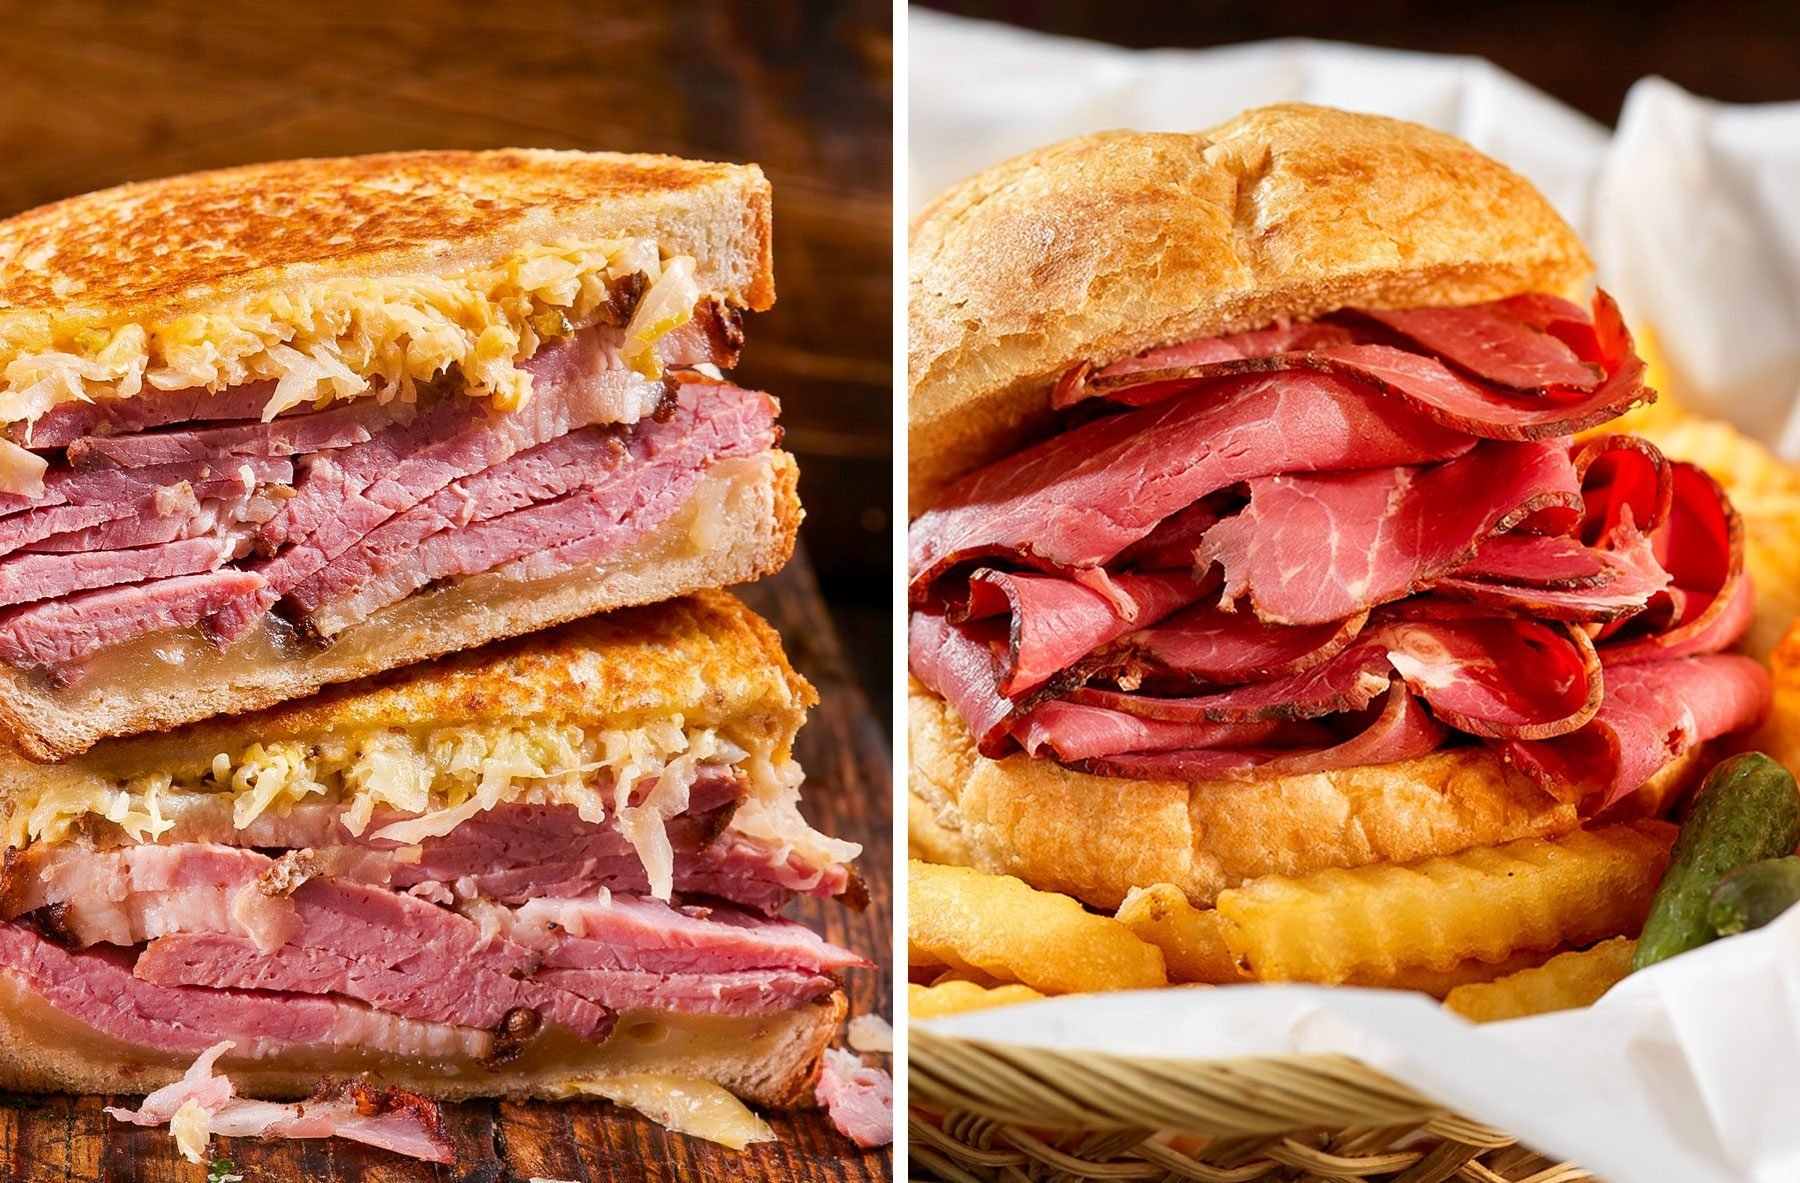 pastrami vs. corned beef: what’s the difference?